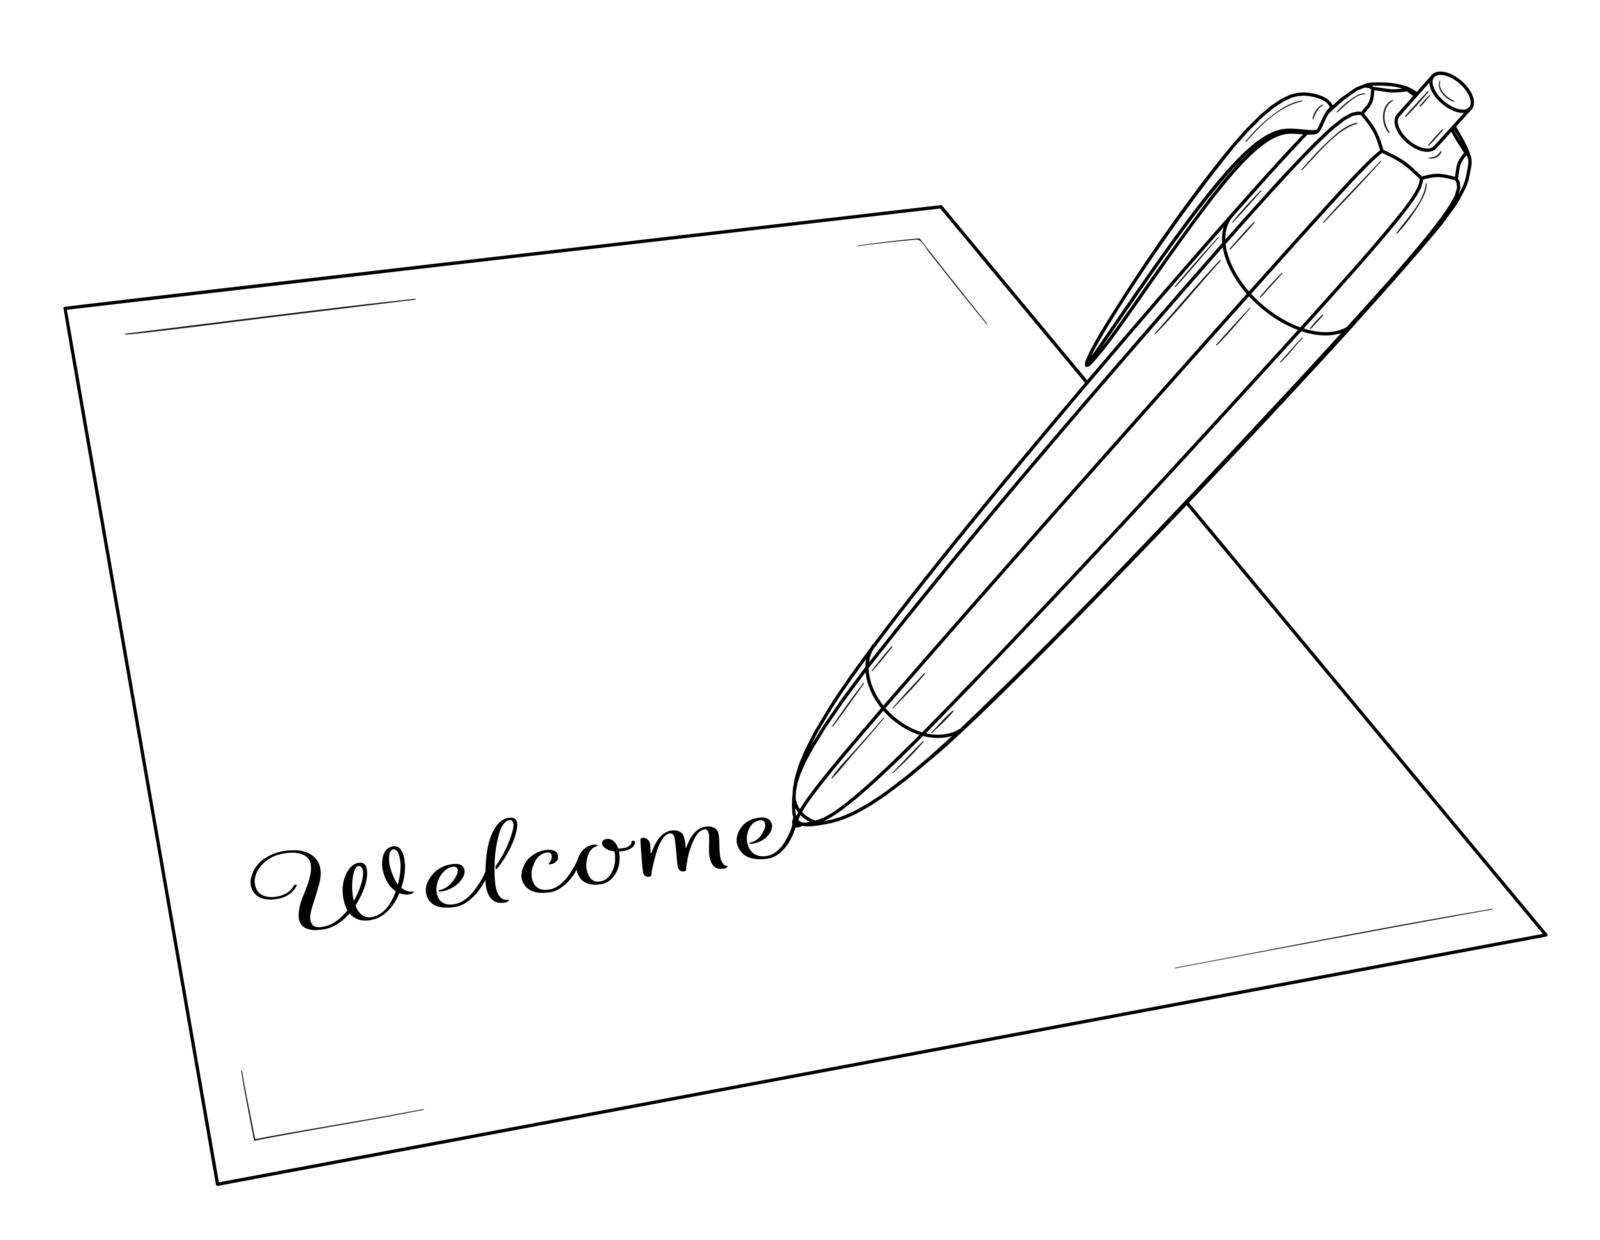 Pen writing on paper word Welcome. Black outline illustration on white background. Sketch.